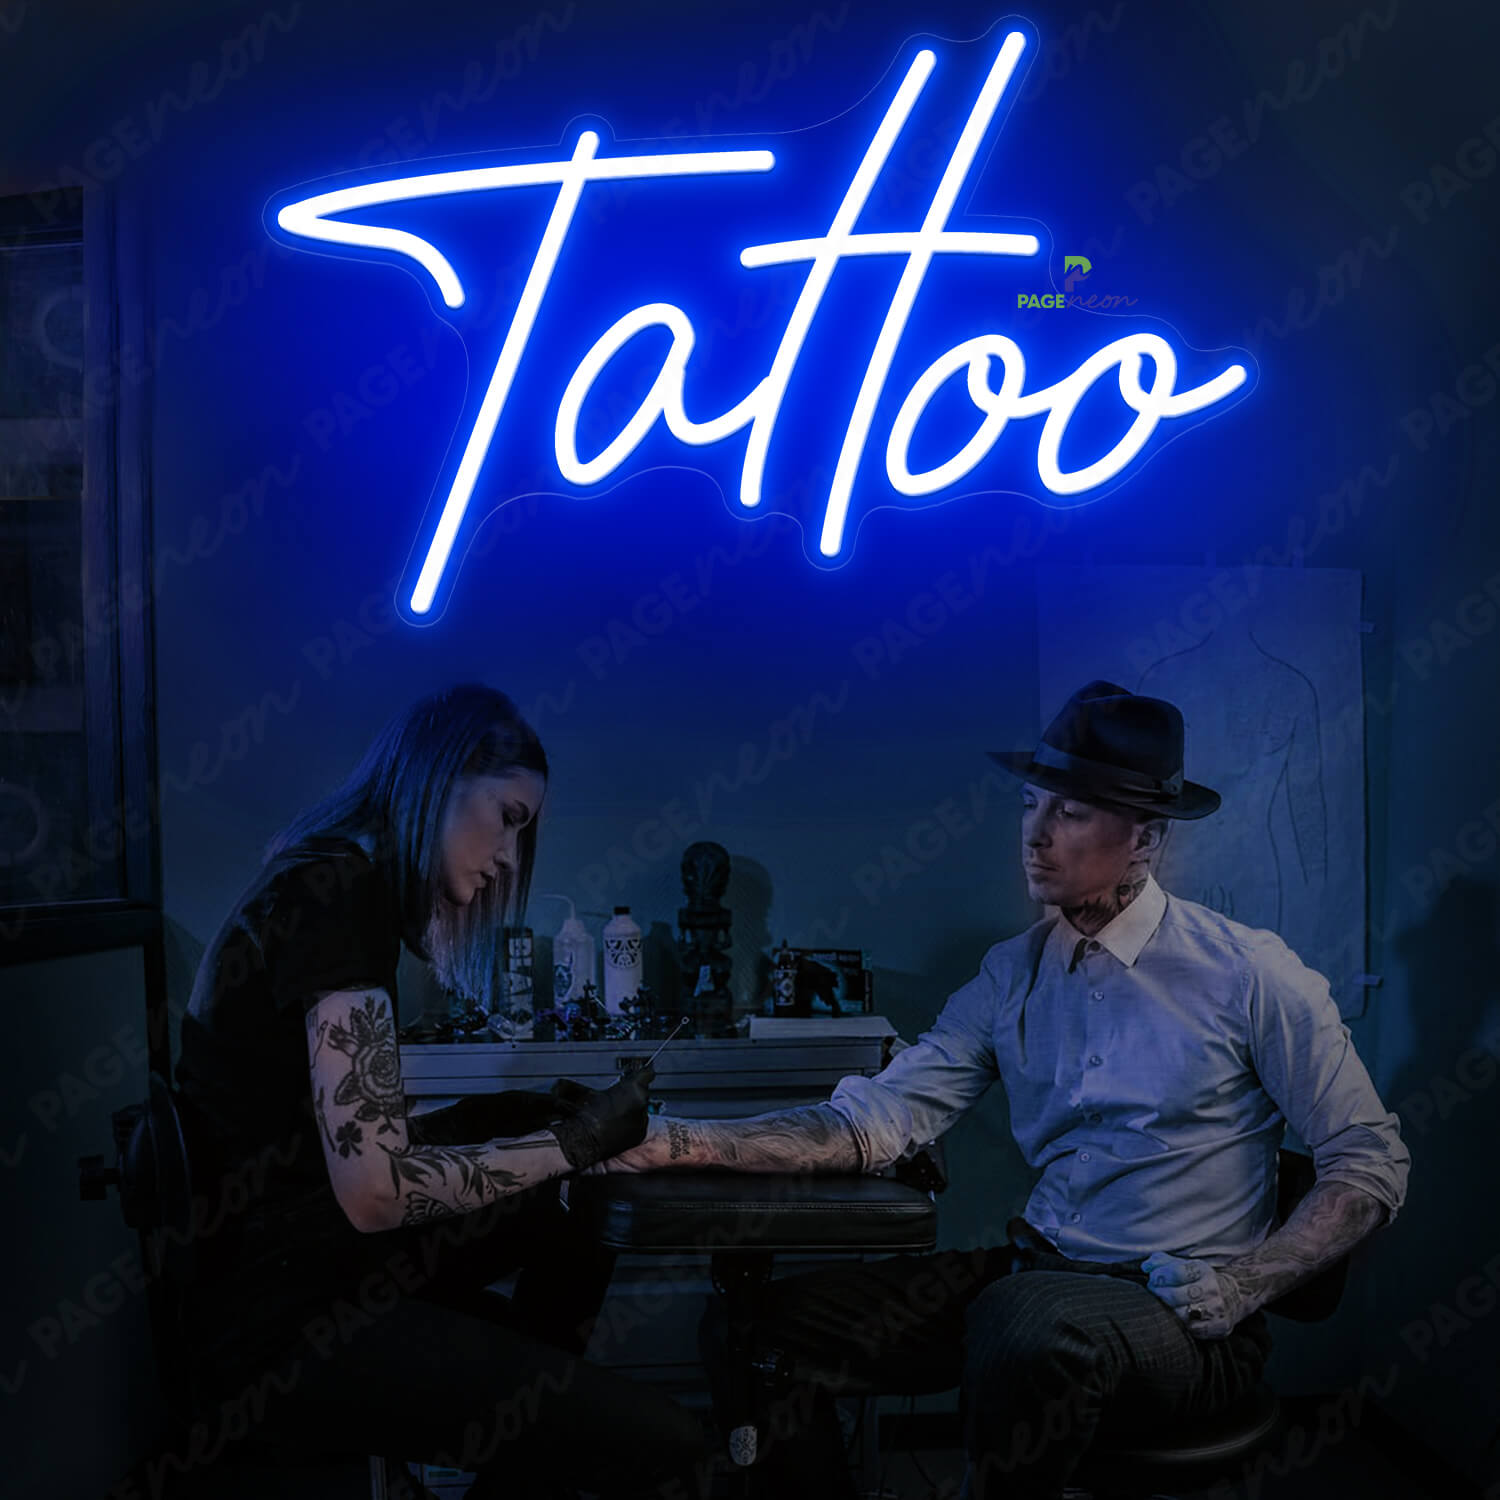 TATTOO Colorfull Neon Sign | Tattoo signs, Neon signs, Lovers art